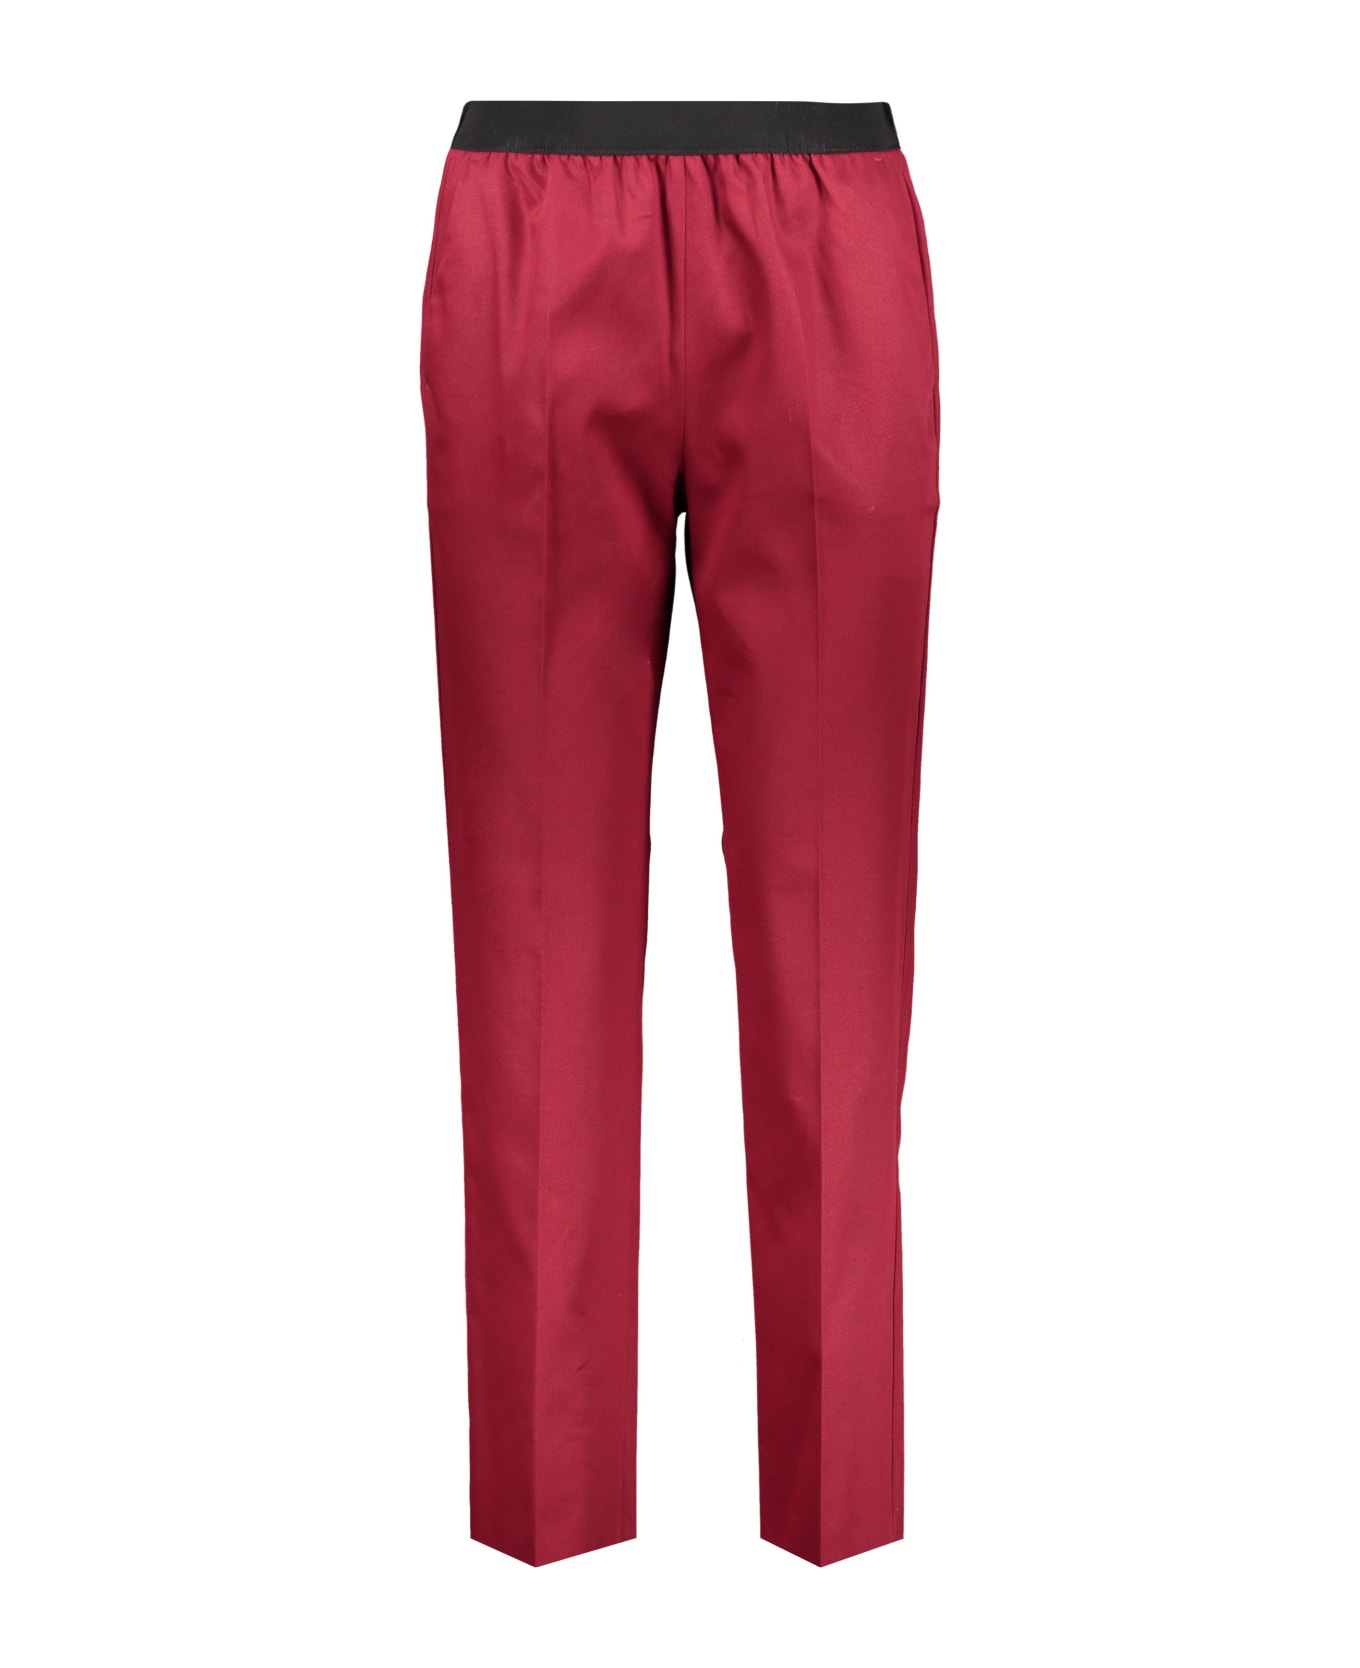 Agnona Cotton Trousers - red ボトムス